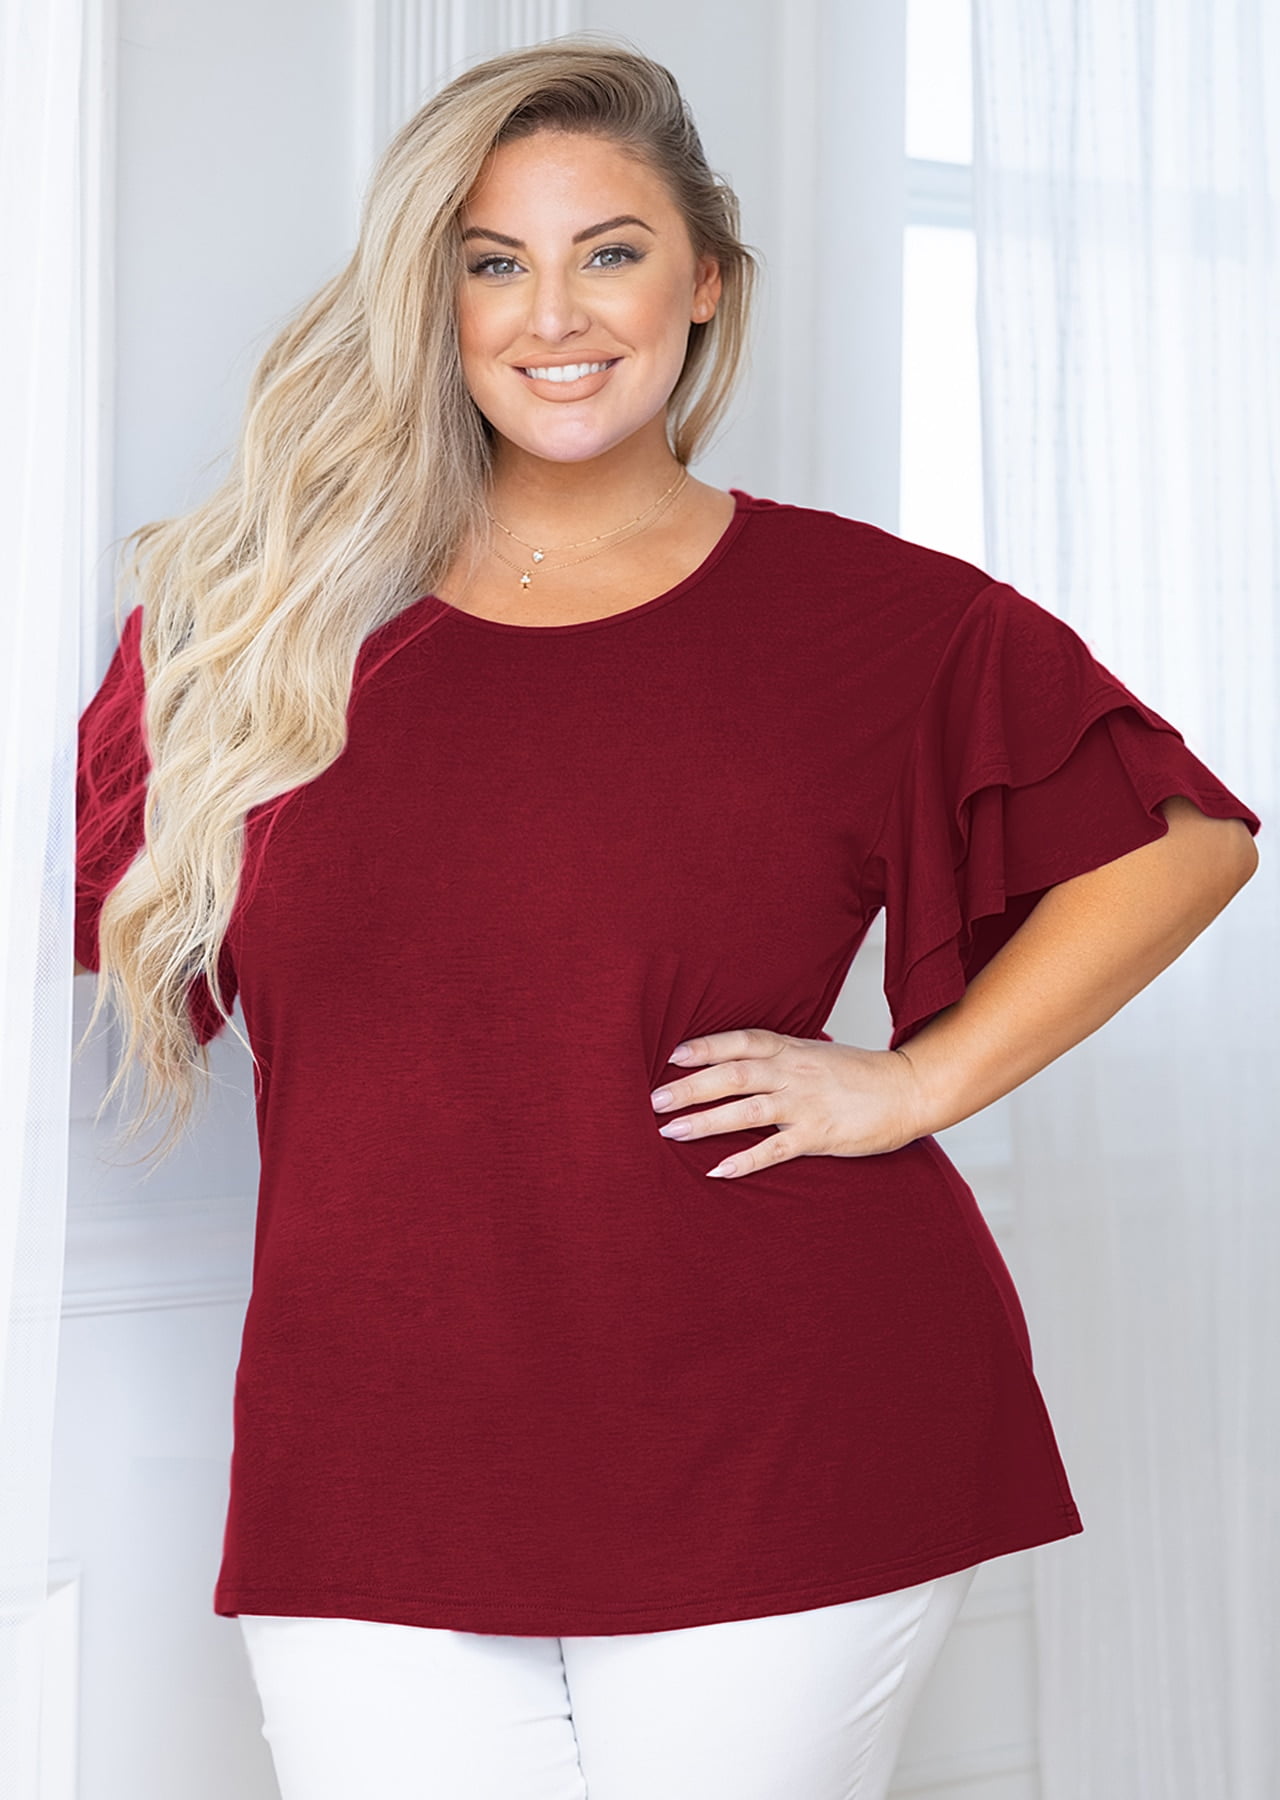 SHOWMALL Plus Size Tops for Women Short Sleeve Burgundy 3X